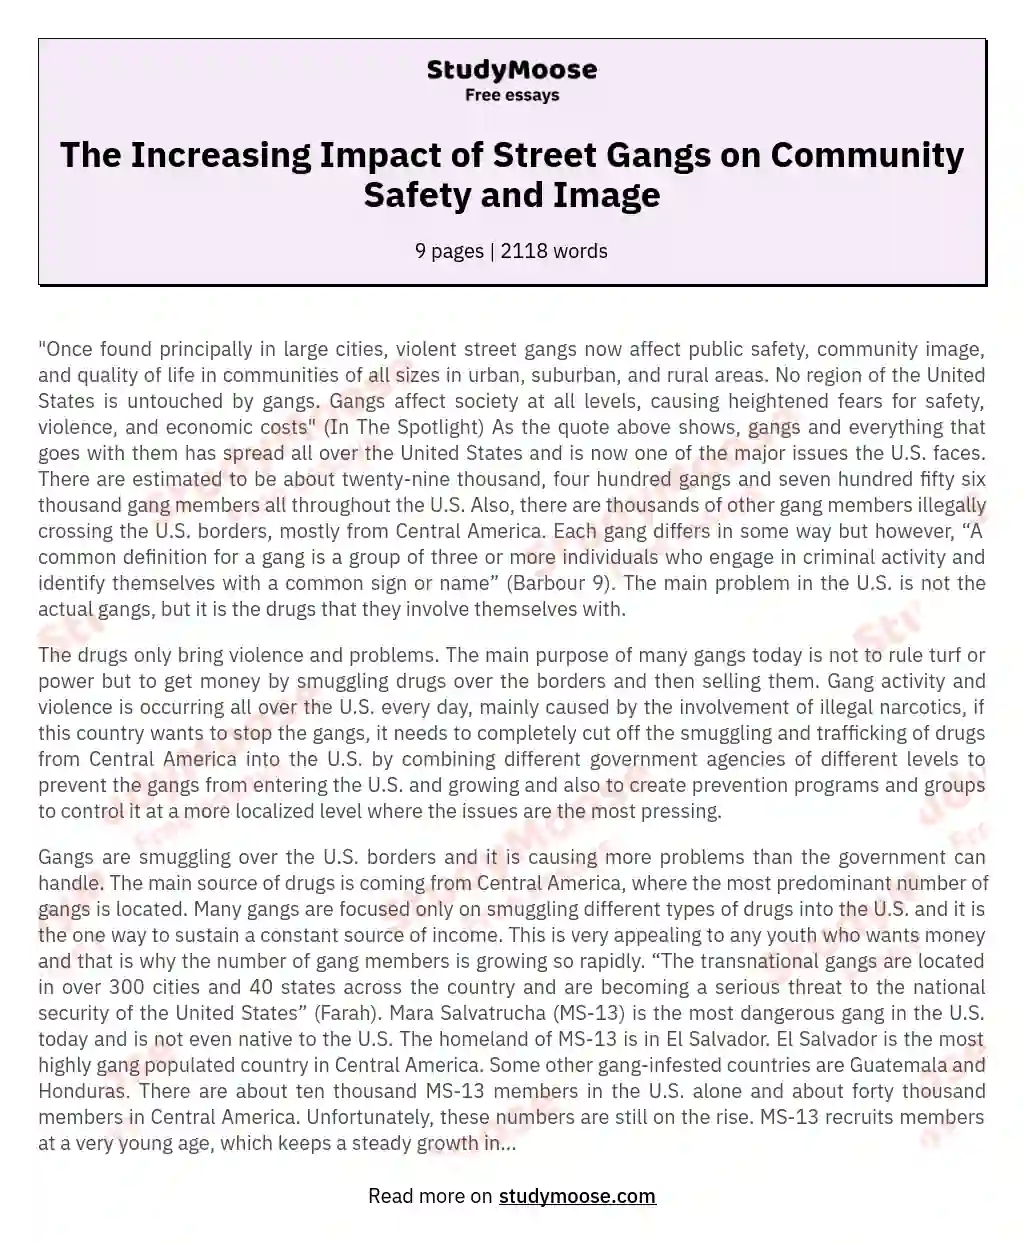 The Impact of Gangs and Drug Trafficking in the U.S. essay